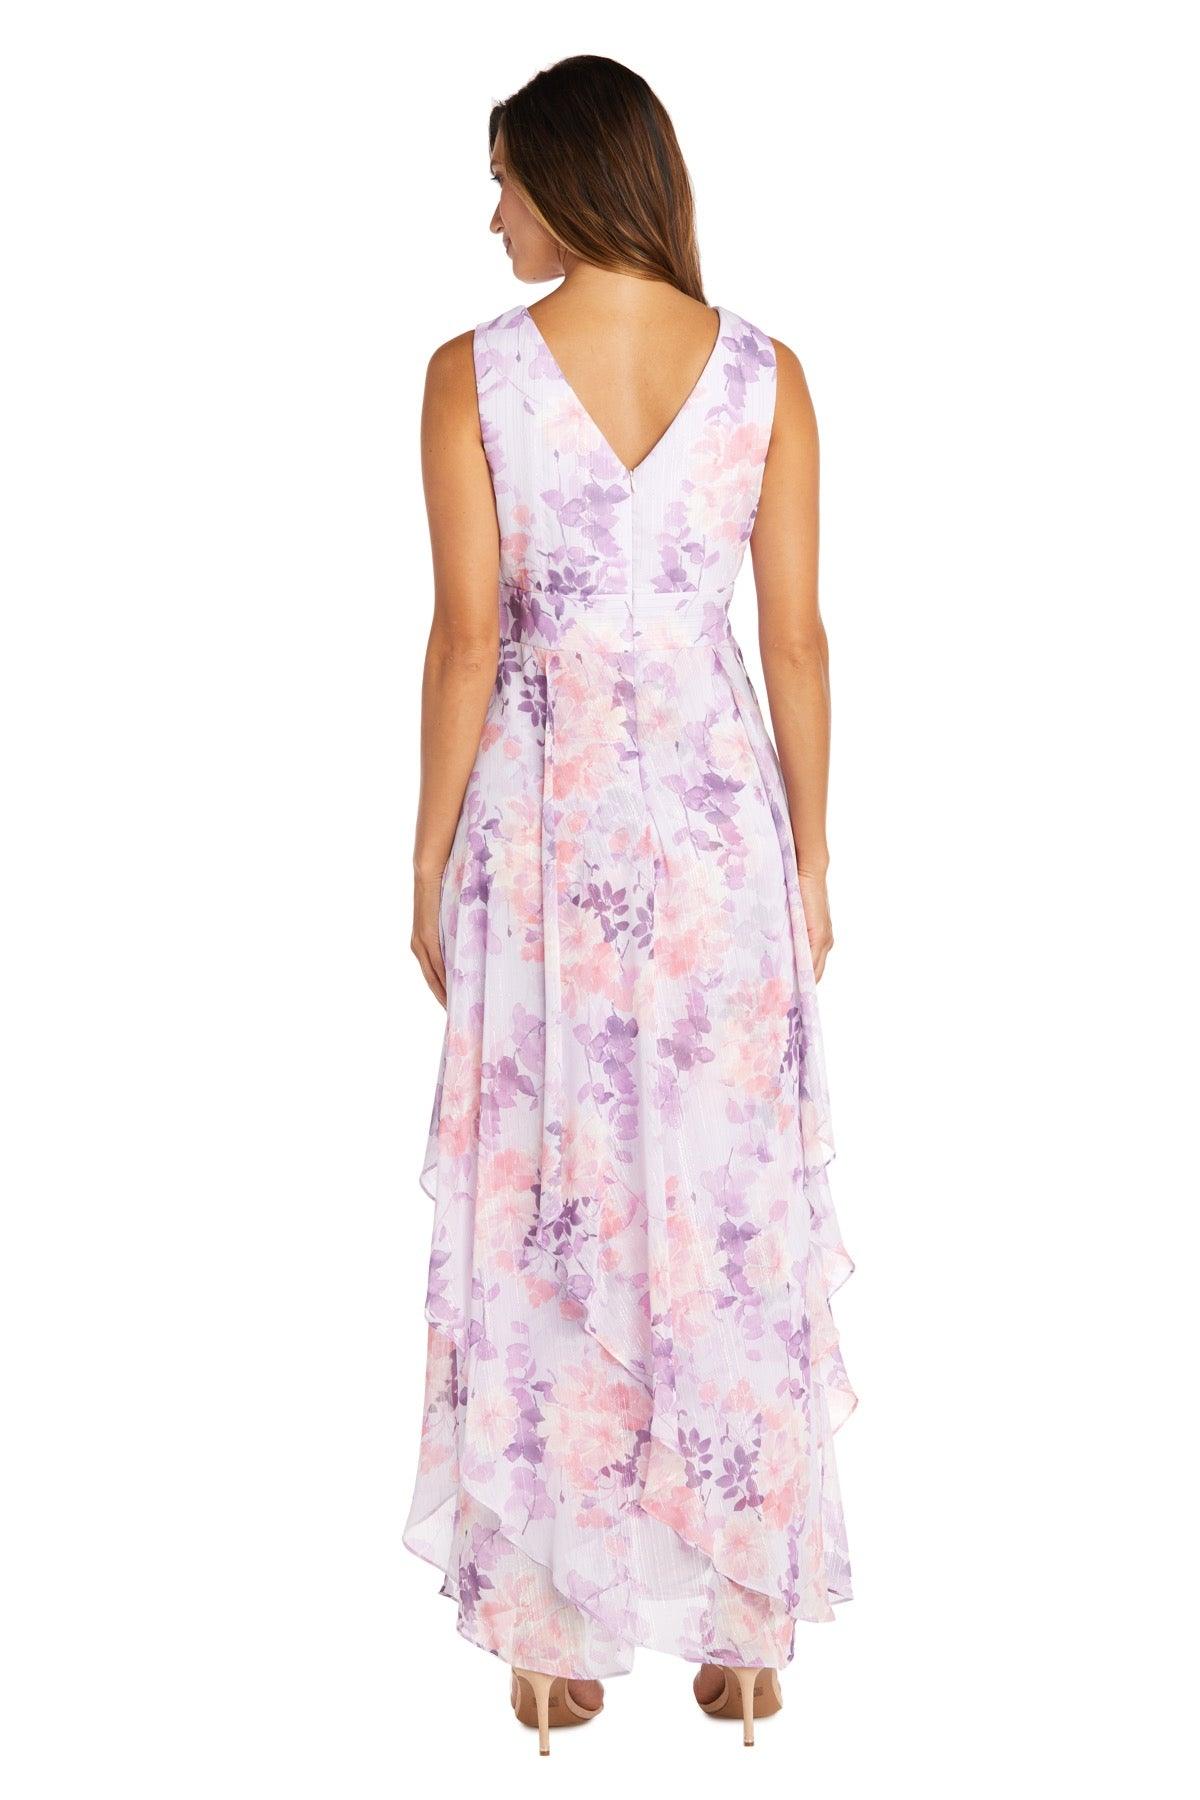 R&M Richards Long Sleeveless Formal Print Gown 9316 - The Dress Outlet